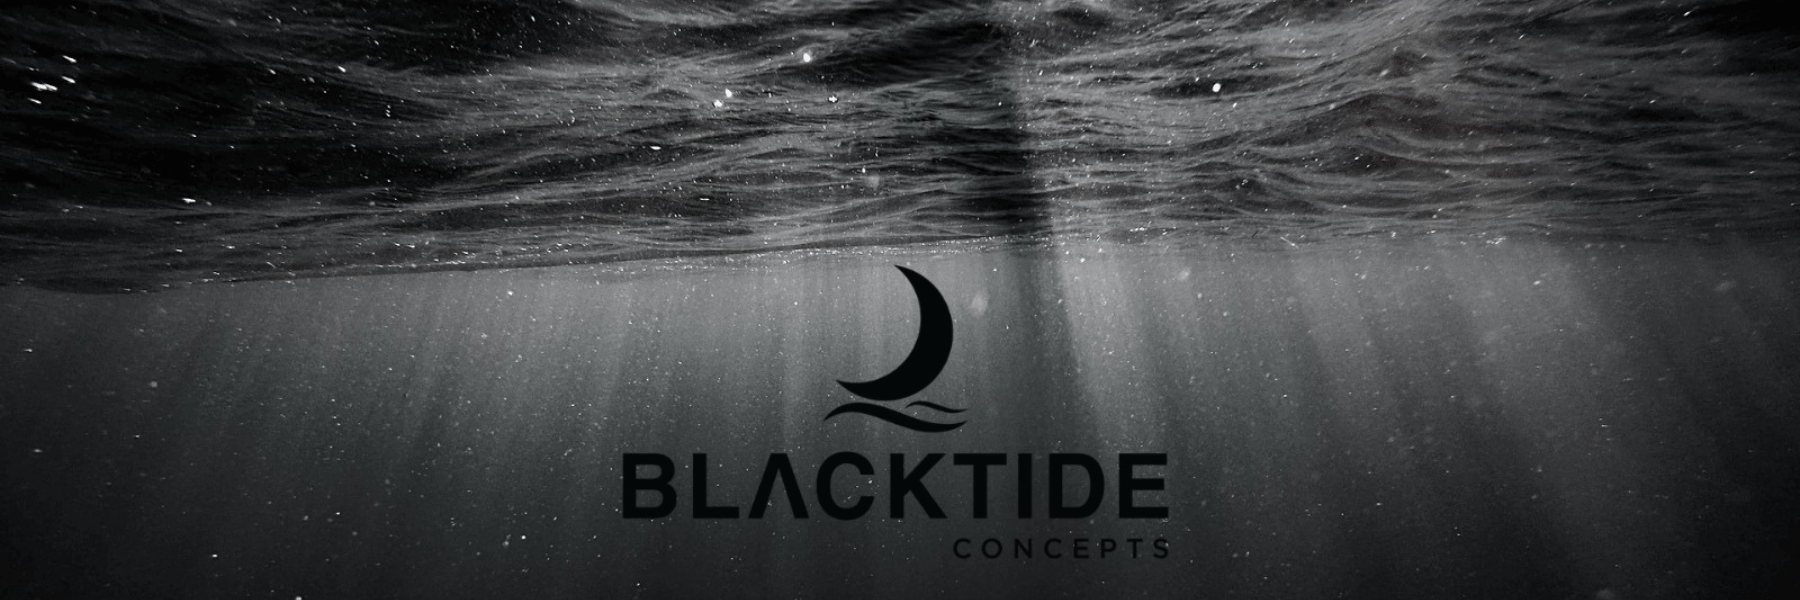 Email Sign-up Banner - Blacktide Concepts Tactical Gear